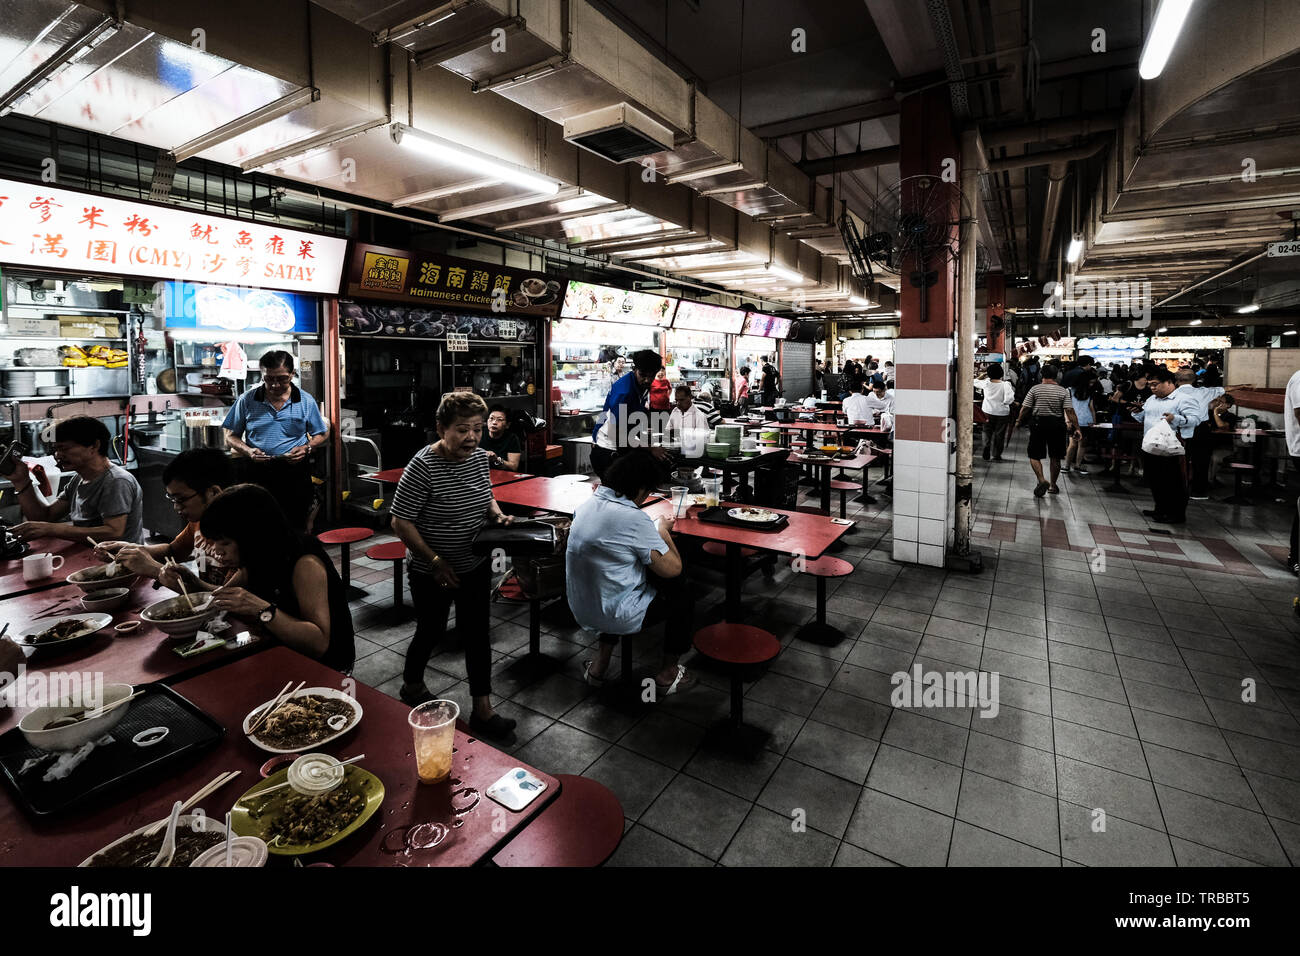 Locals Eating at Hawker Centre, Singapore Stock Photo